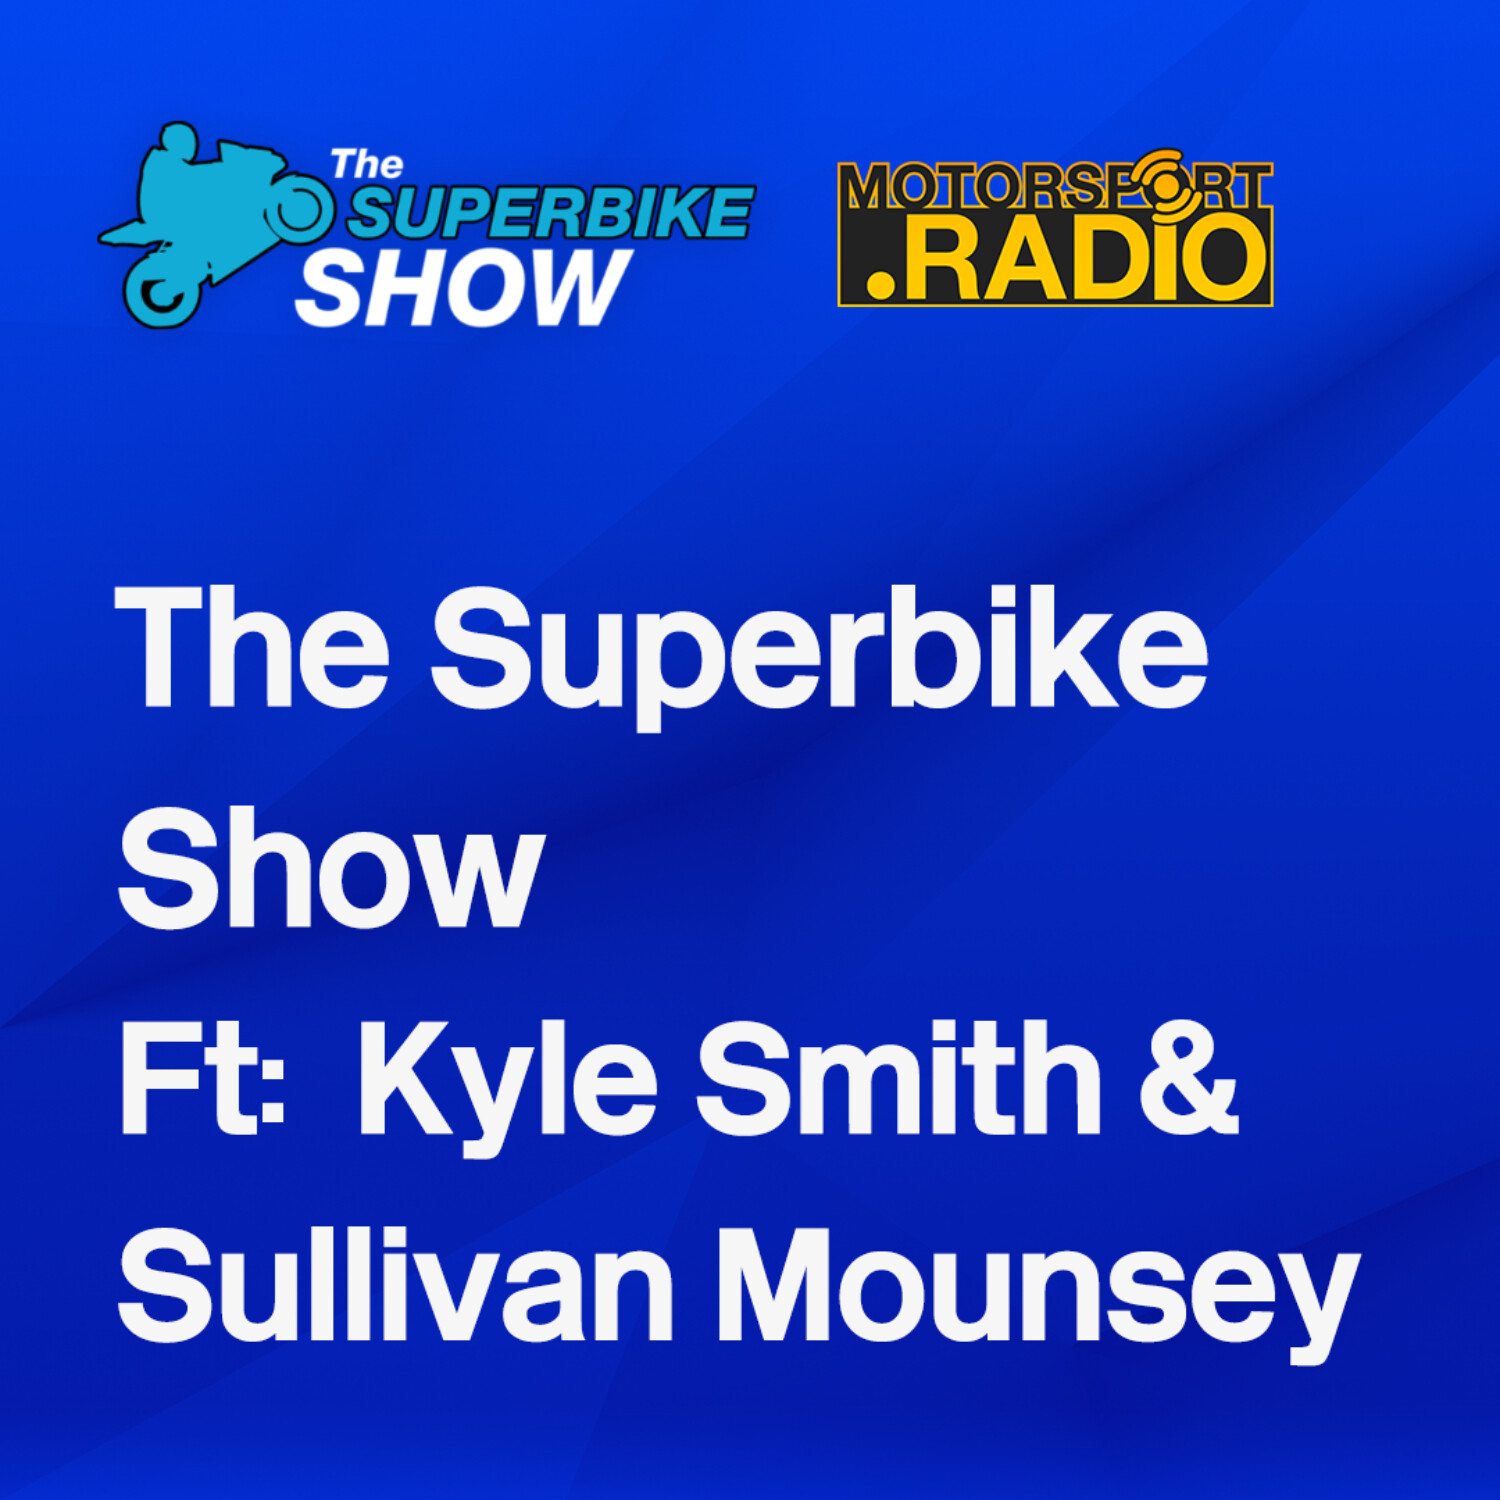 The Superbike Show with Kyle Smith & Sullivan Mounsey